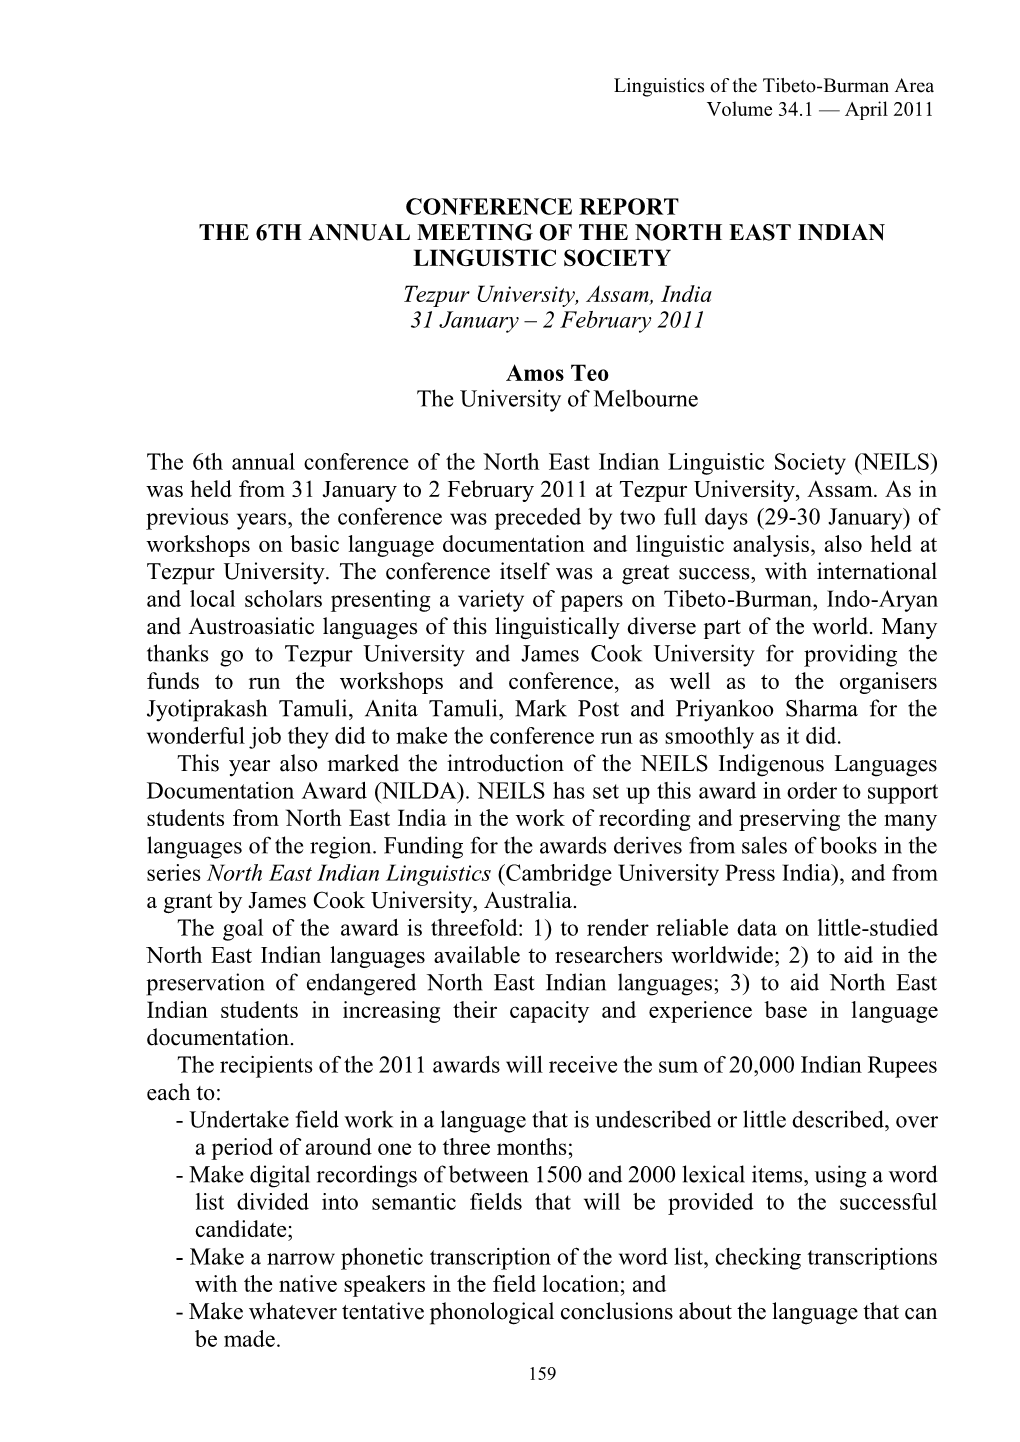 CONFERENCE REPORT the 6TH ANNUAL MEETING of the NORTH EAST INDIAN LINGUISTIC SOCIETY Tezpur University, Assam, India 31 January – 2 February 2011